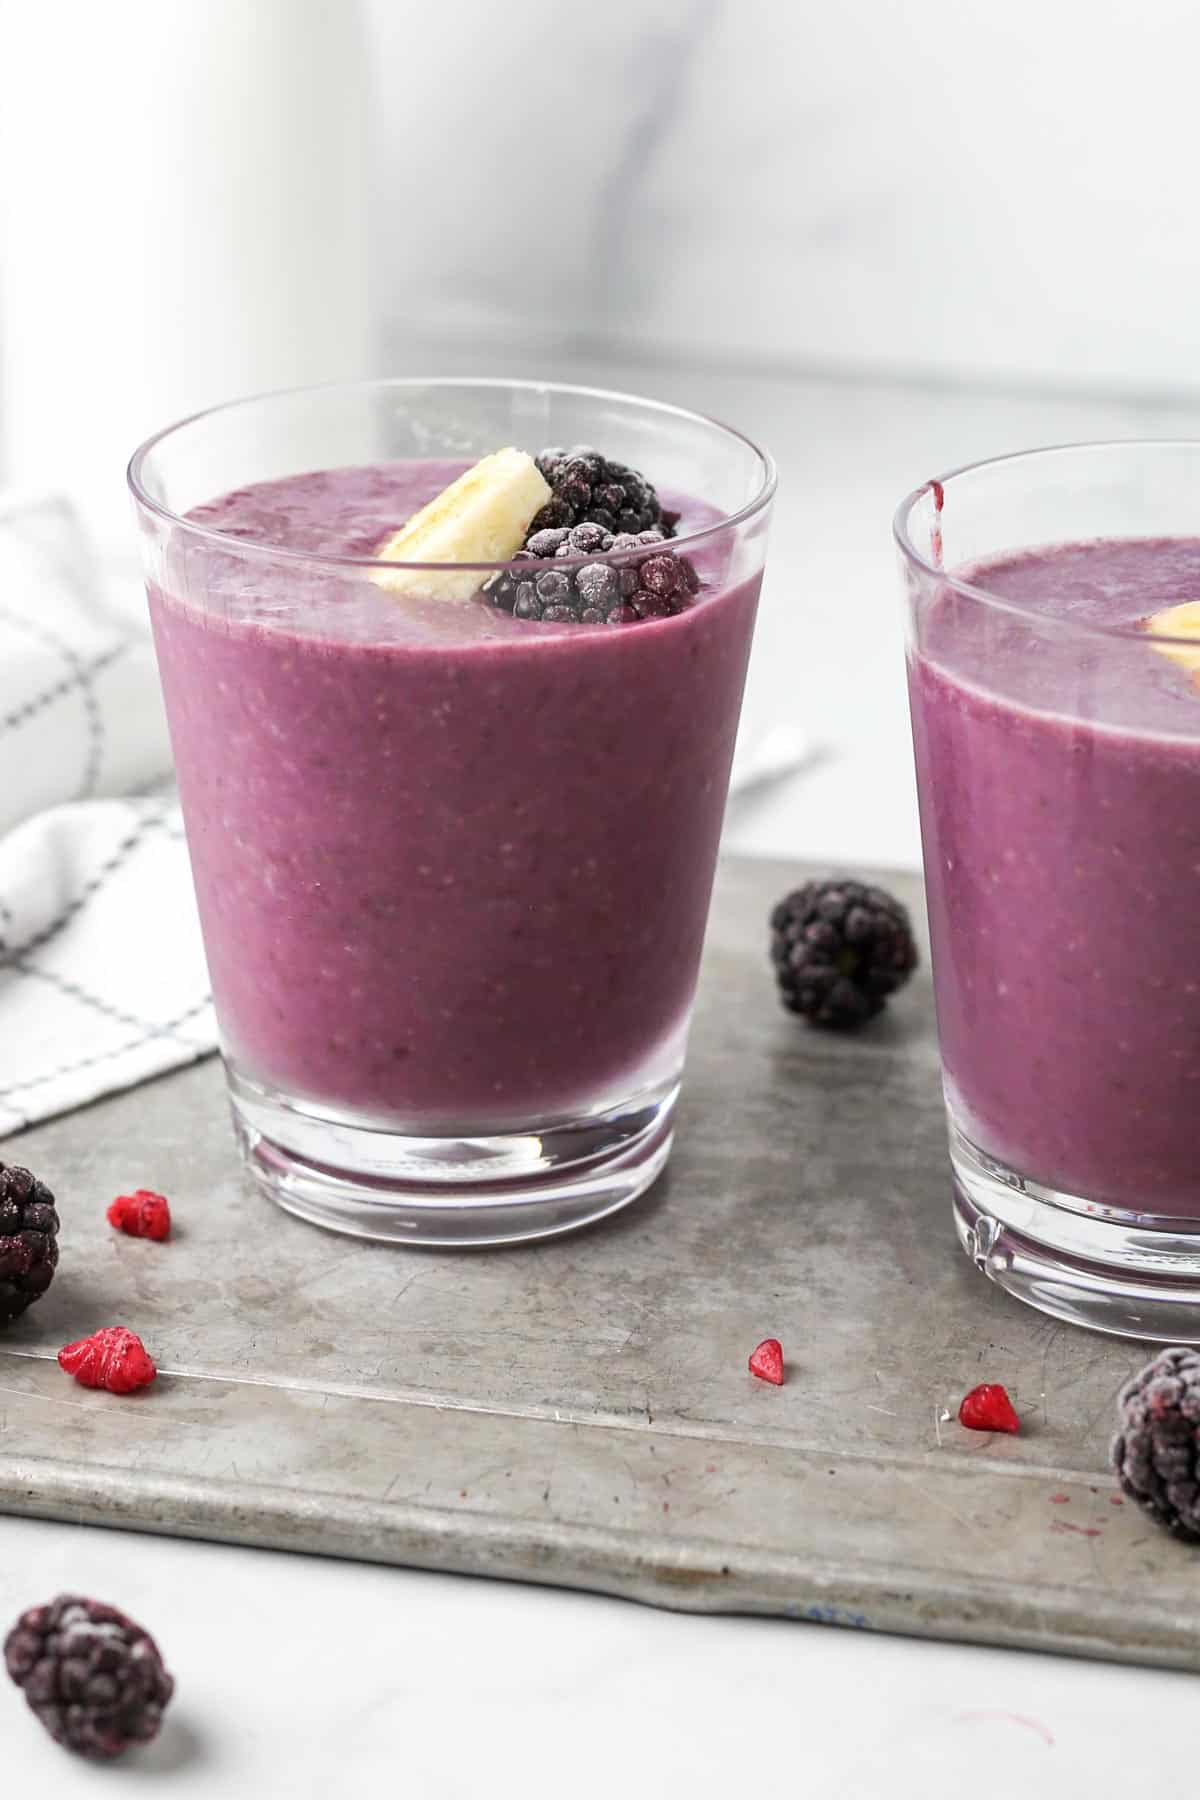 strawberry blackberry banana smoothie in two glassed garnished with banana and blackberries.